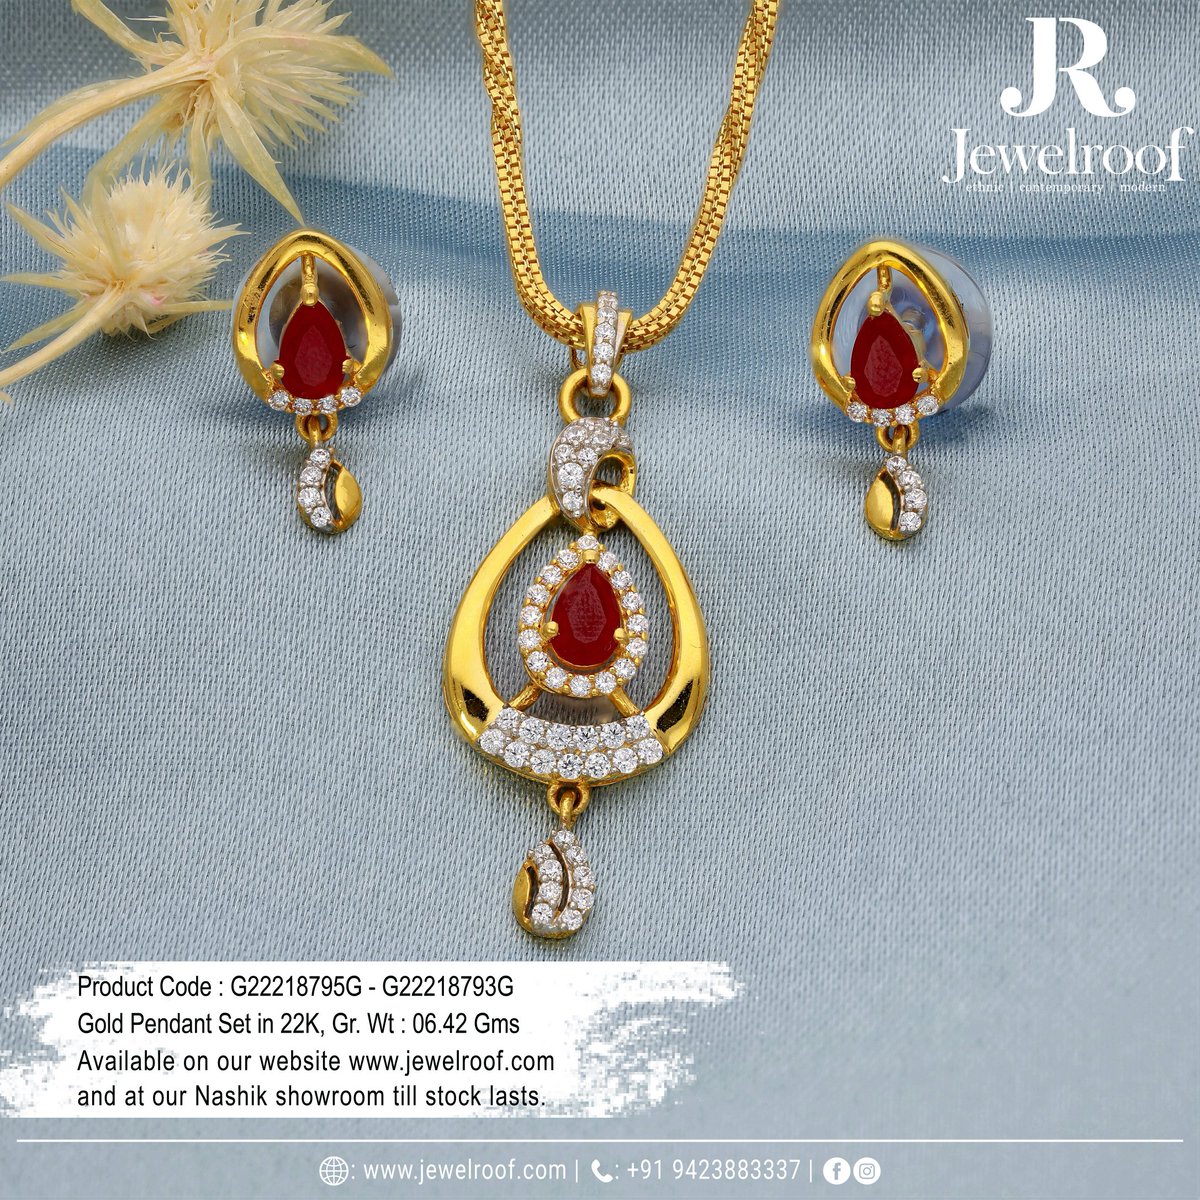 Adorn yourself with the elegance of this magnificent Gold Pendant Set, crafted to perfection with intricate details and a timeless design.

#rcbafnajewellers #rcbafna #jewelroof #nashik #goldjewellery  #silverjewellery #platinumjewellery #diamondjewellery #gold #diamondearring